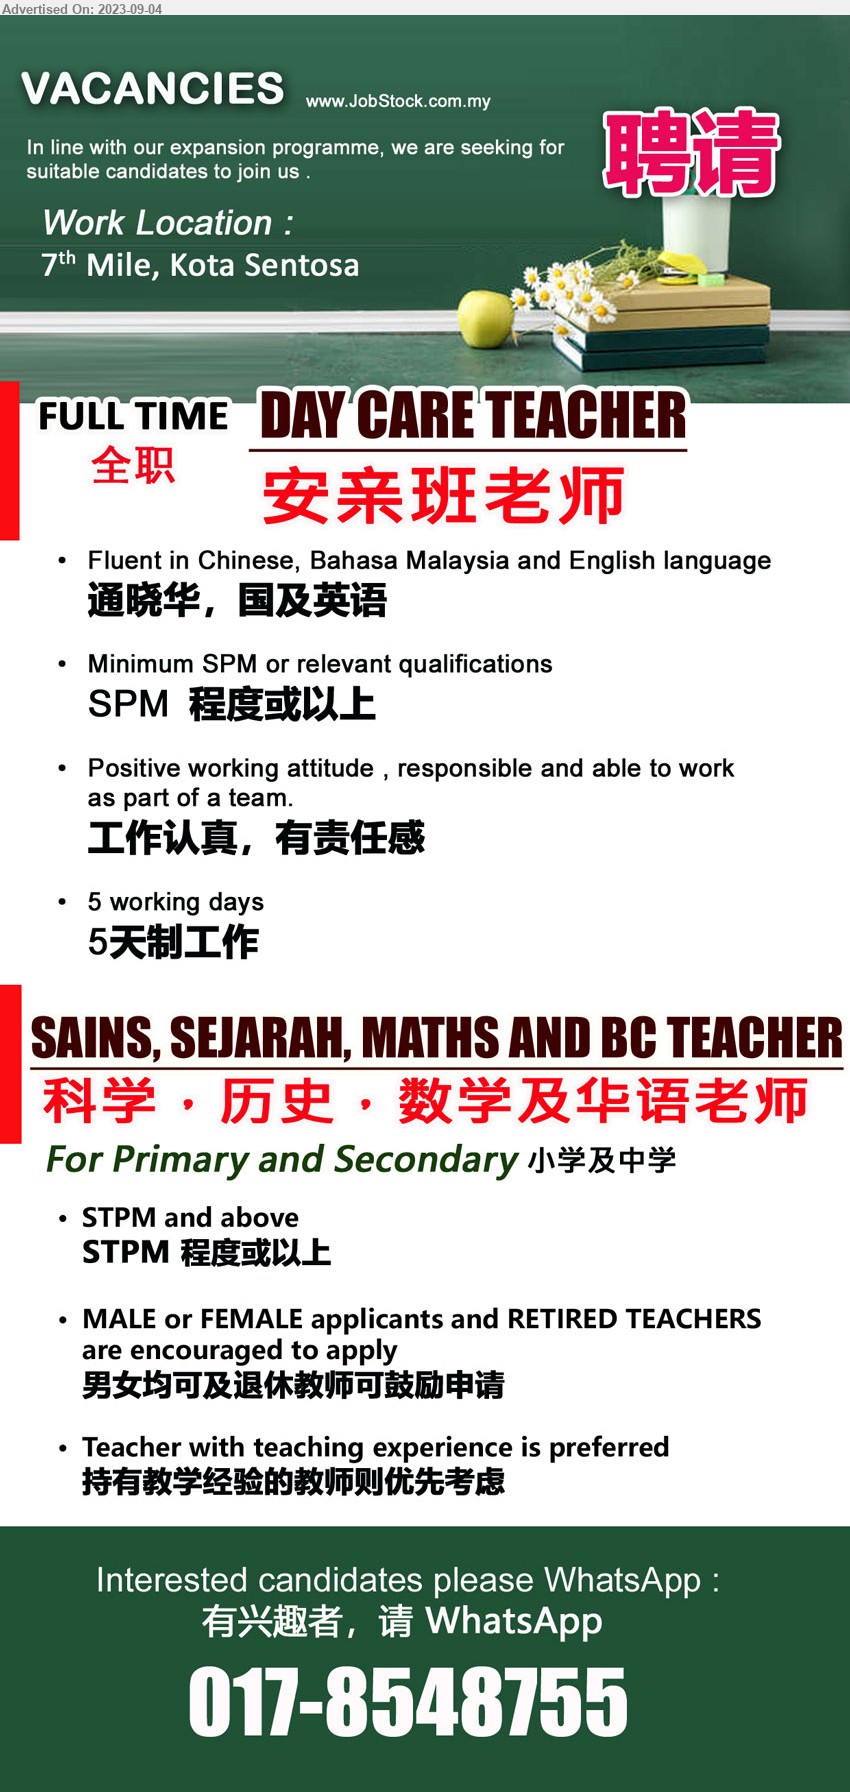 ADVERTISER  - 1. DAY CARE TEACHER 安亲班老师 (Kuching), SPM, Fluent in Chinese, Bahasa Malaysia and English language,...
2. SAINS, SEJARAH, MATHS AND BC TEACHER 科学，历史，数学及华语老师 (Kuching), For Primary and Secondary, STPM and above, Teacher with teaching experience is preferred,...
WhatsApp 017-8548755